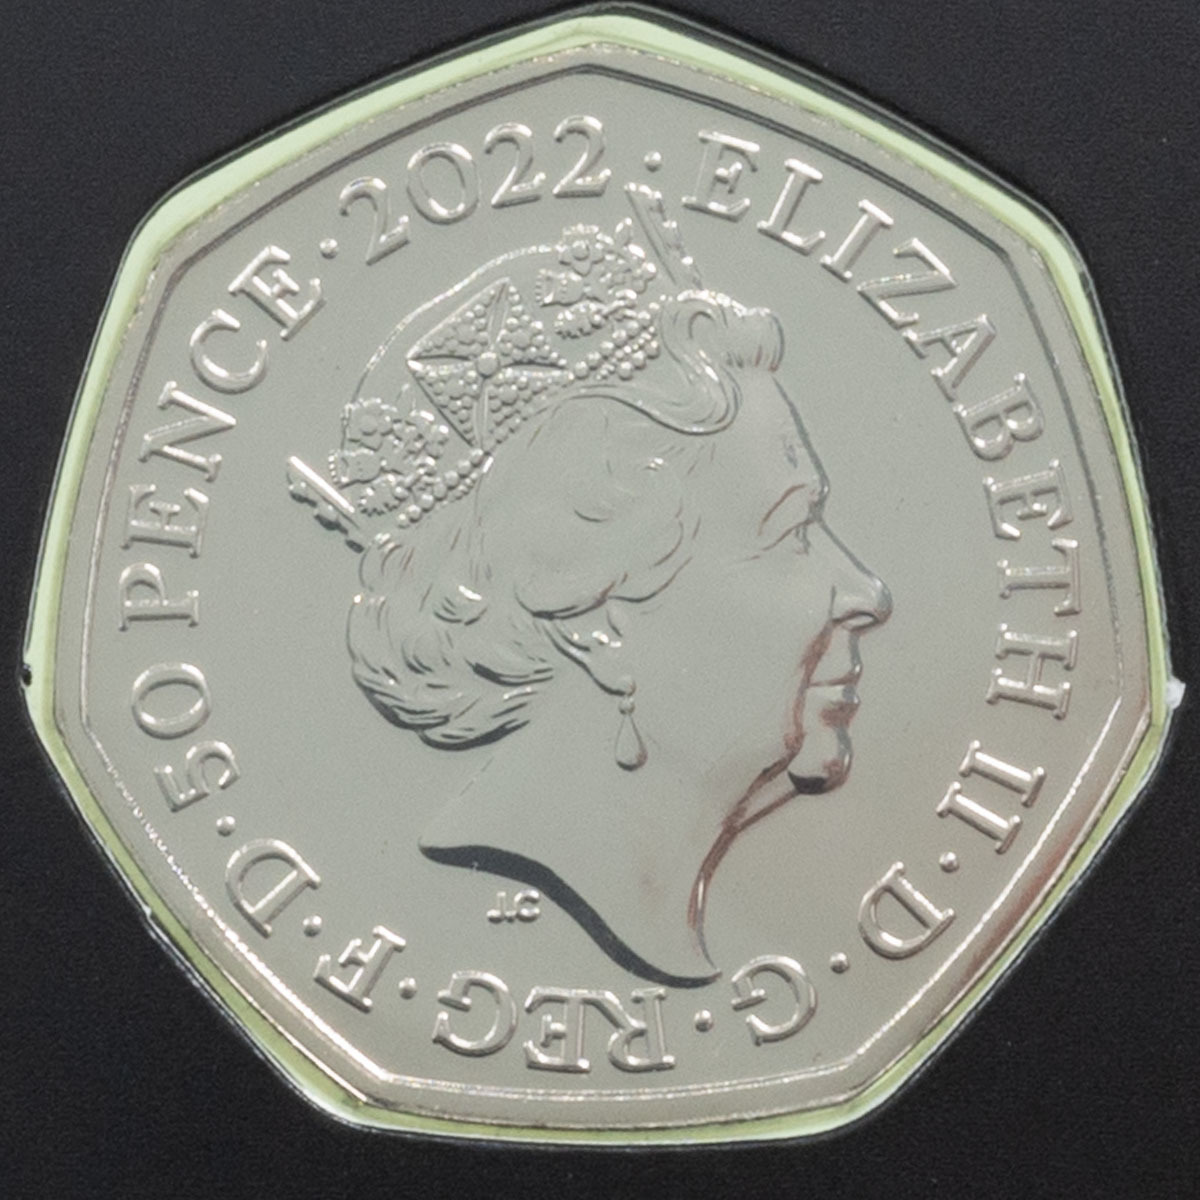 UK22BBBU 2022 British Broadcasting Corporation Fifty Pence Brilliant Uncirculated Coin In Folder Obverse